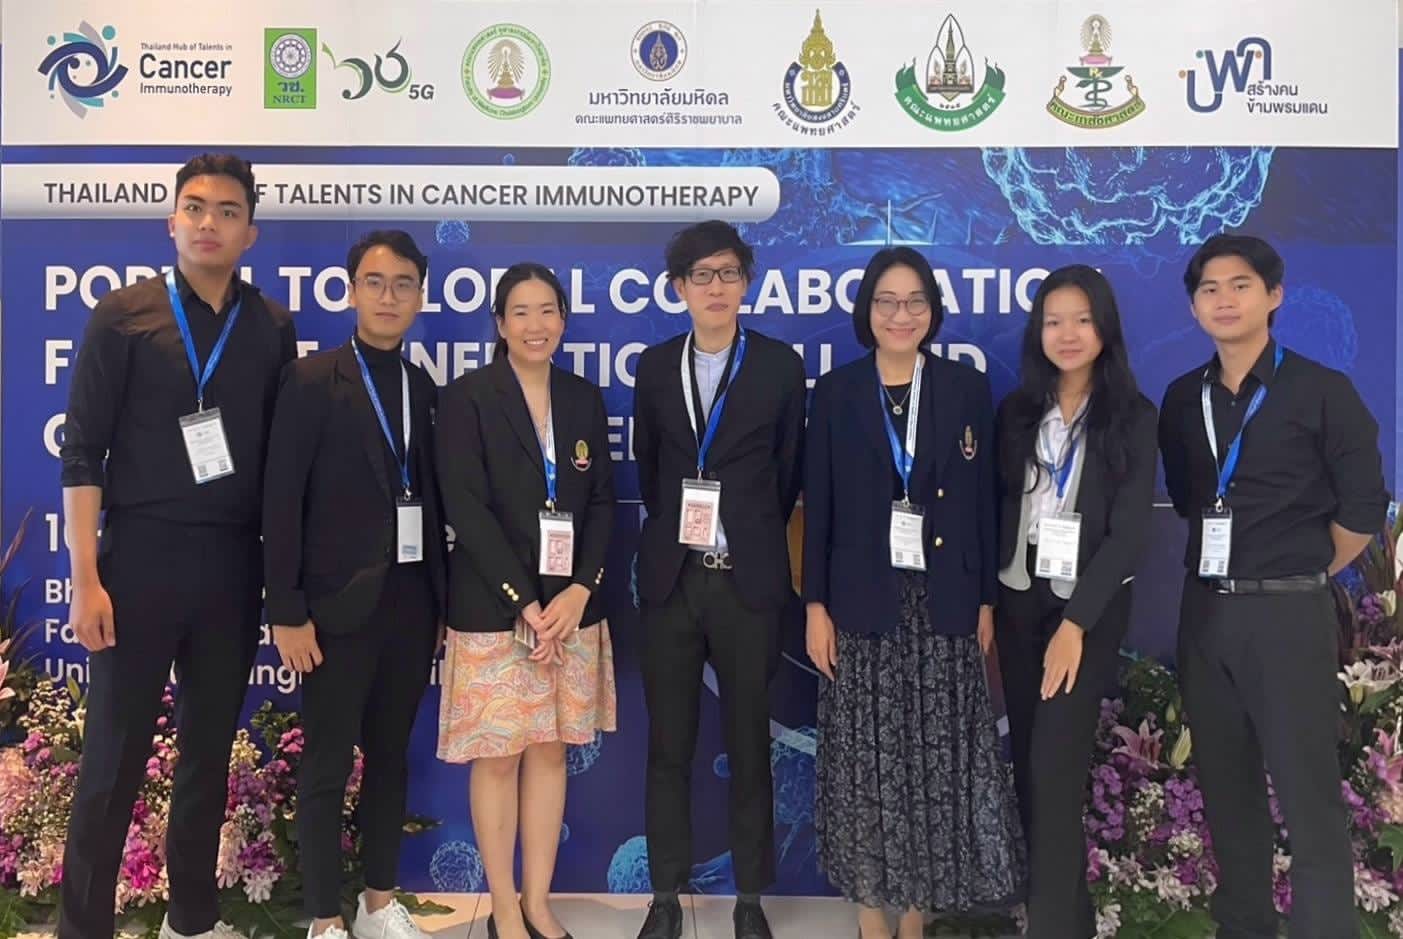 Udayana University Medical Faculty Students Again Make Achievements in the International Event